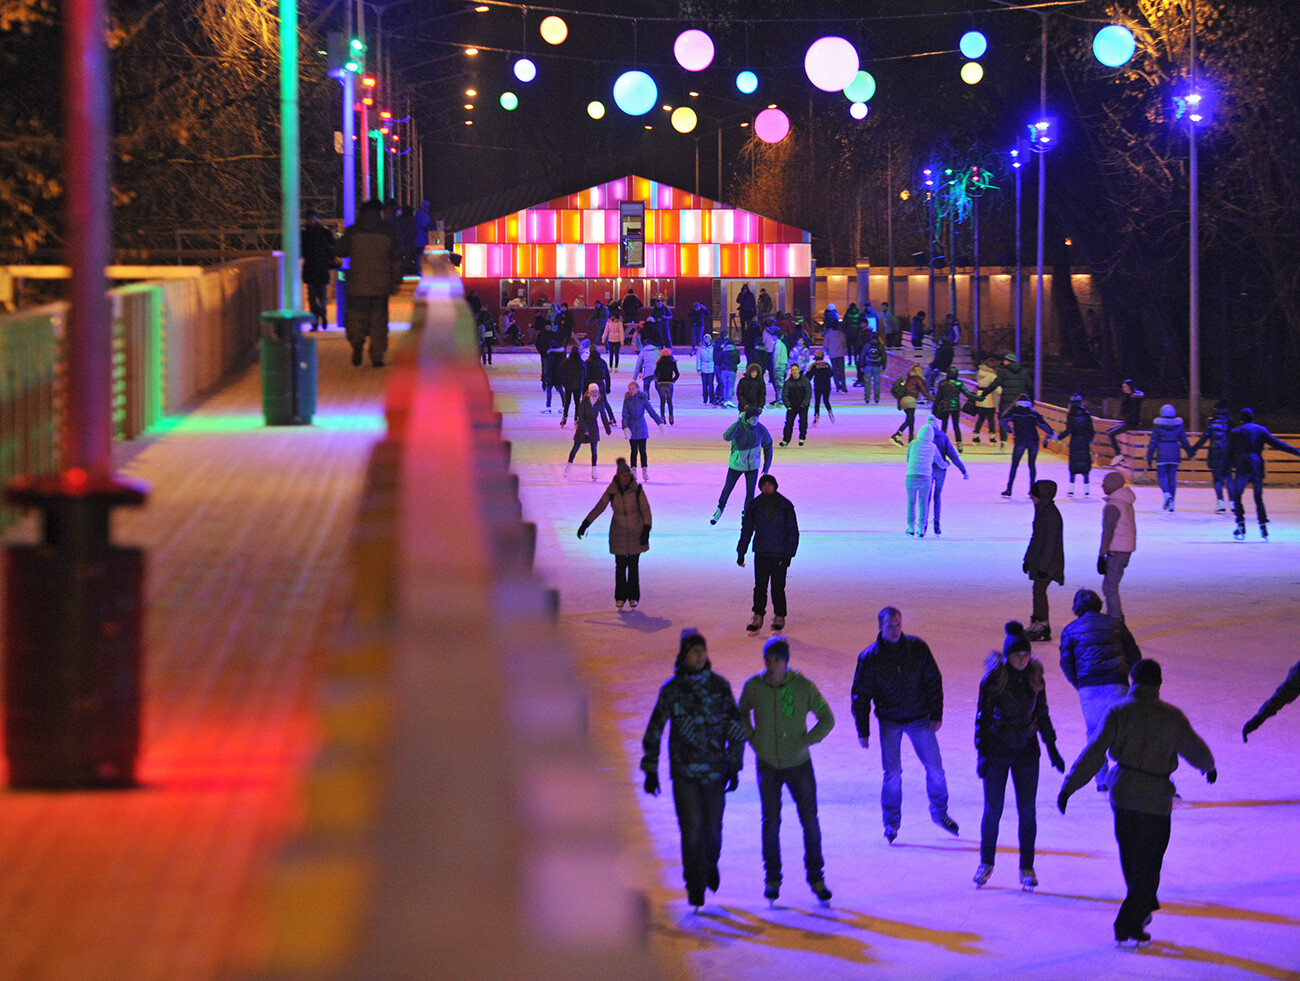 Gorky park's skating rink is now one of the largest in Europe